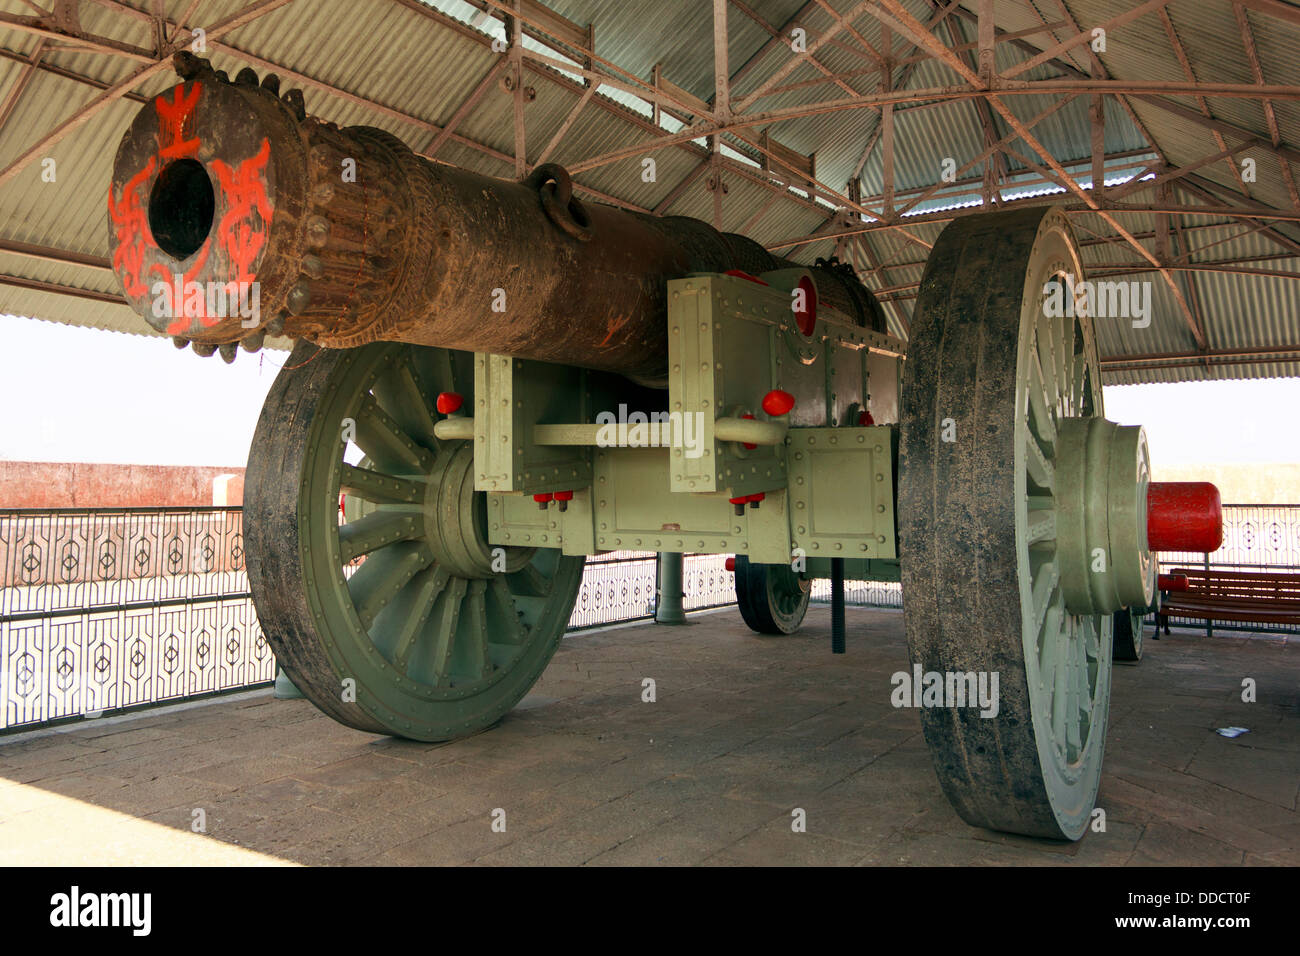 The Jaivana cannon is the largest wheeled cannon ever constructed located at the Jaigarh Fort, Jaipur, Rajasthan, India. Stock Photo